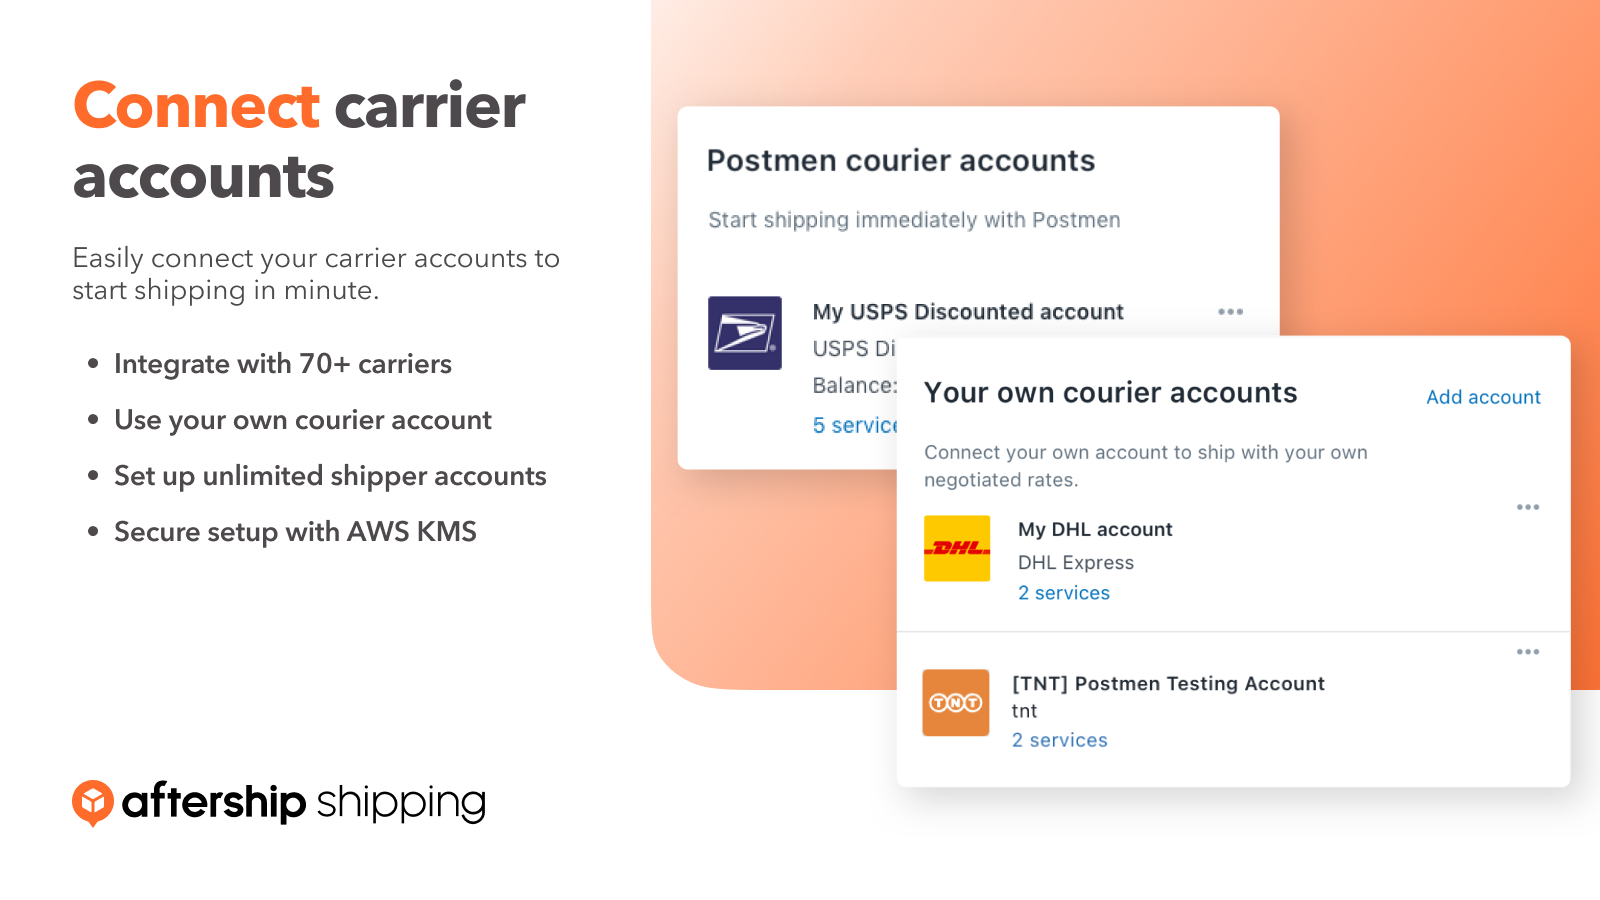 connect carrier accounts